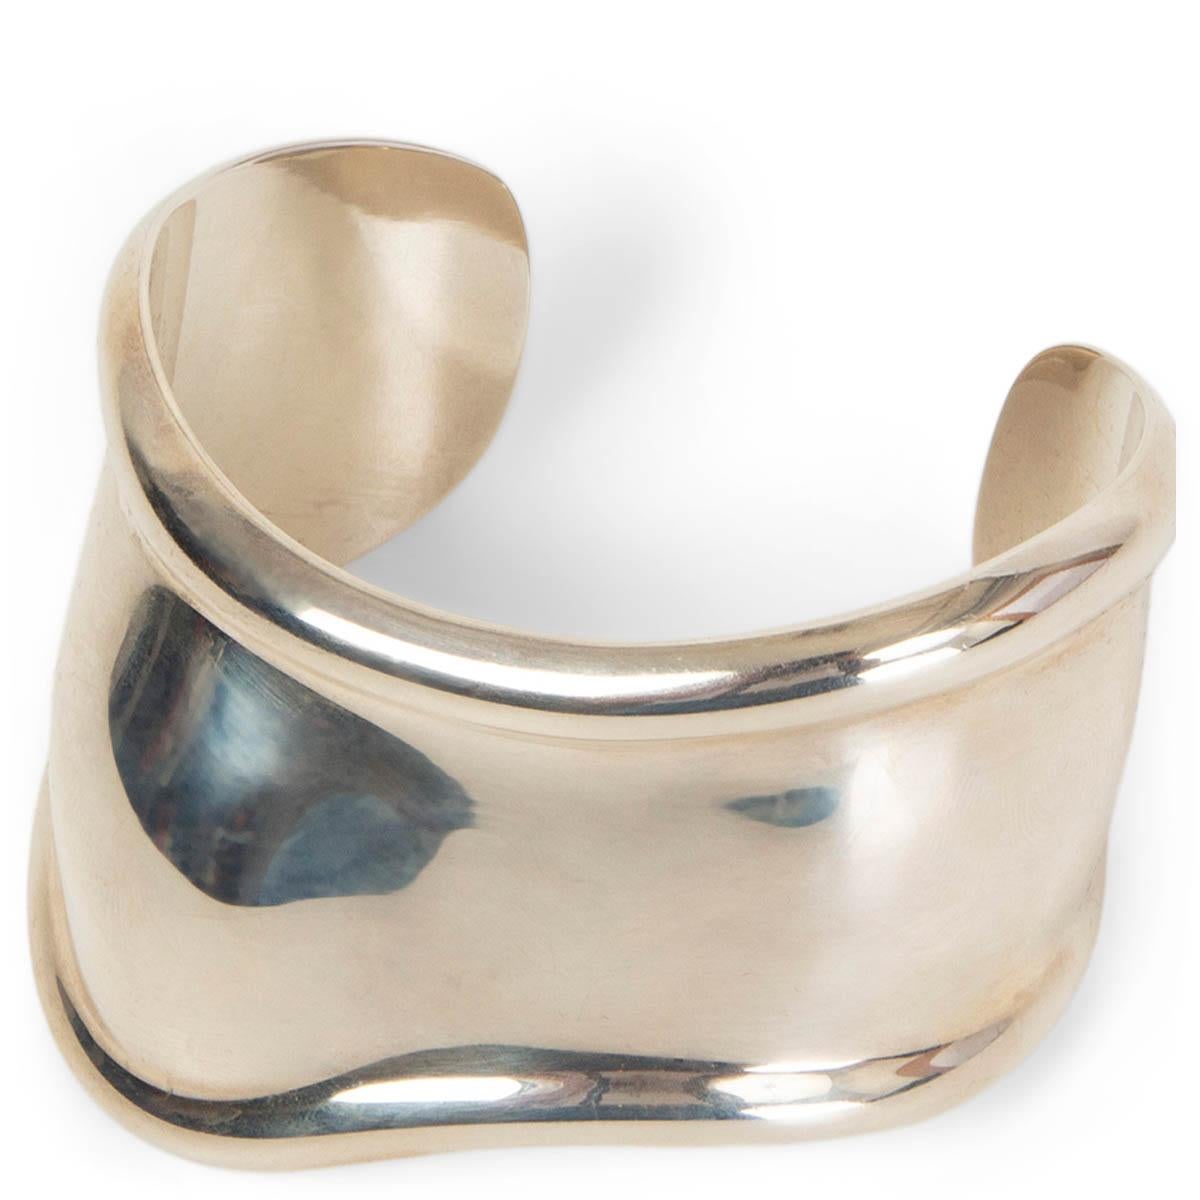 100% authentic Tiffany & Co. Elsa Peretti Small Bone cuff in Sterling Silver. Has been worn with some faint scratches. Overall in excellent condition. 

Measurements
Width	4.3cm (1.7in)
Length	14cm (5.5in)
Circumference	14.5cm